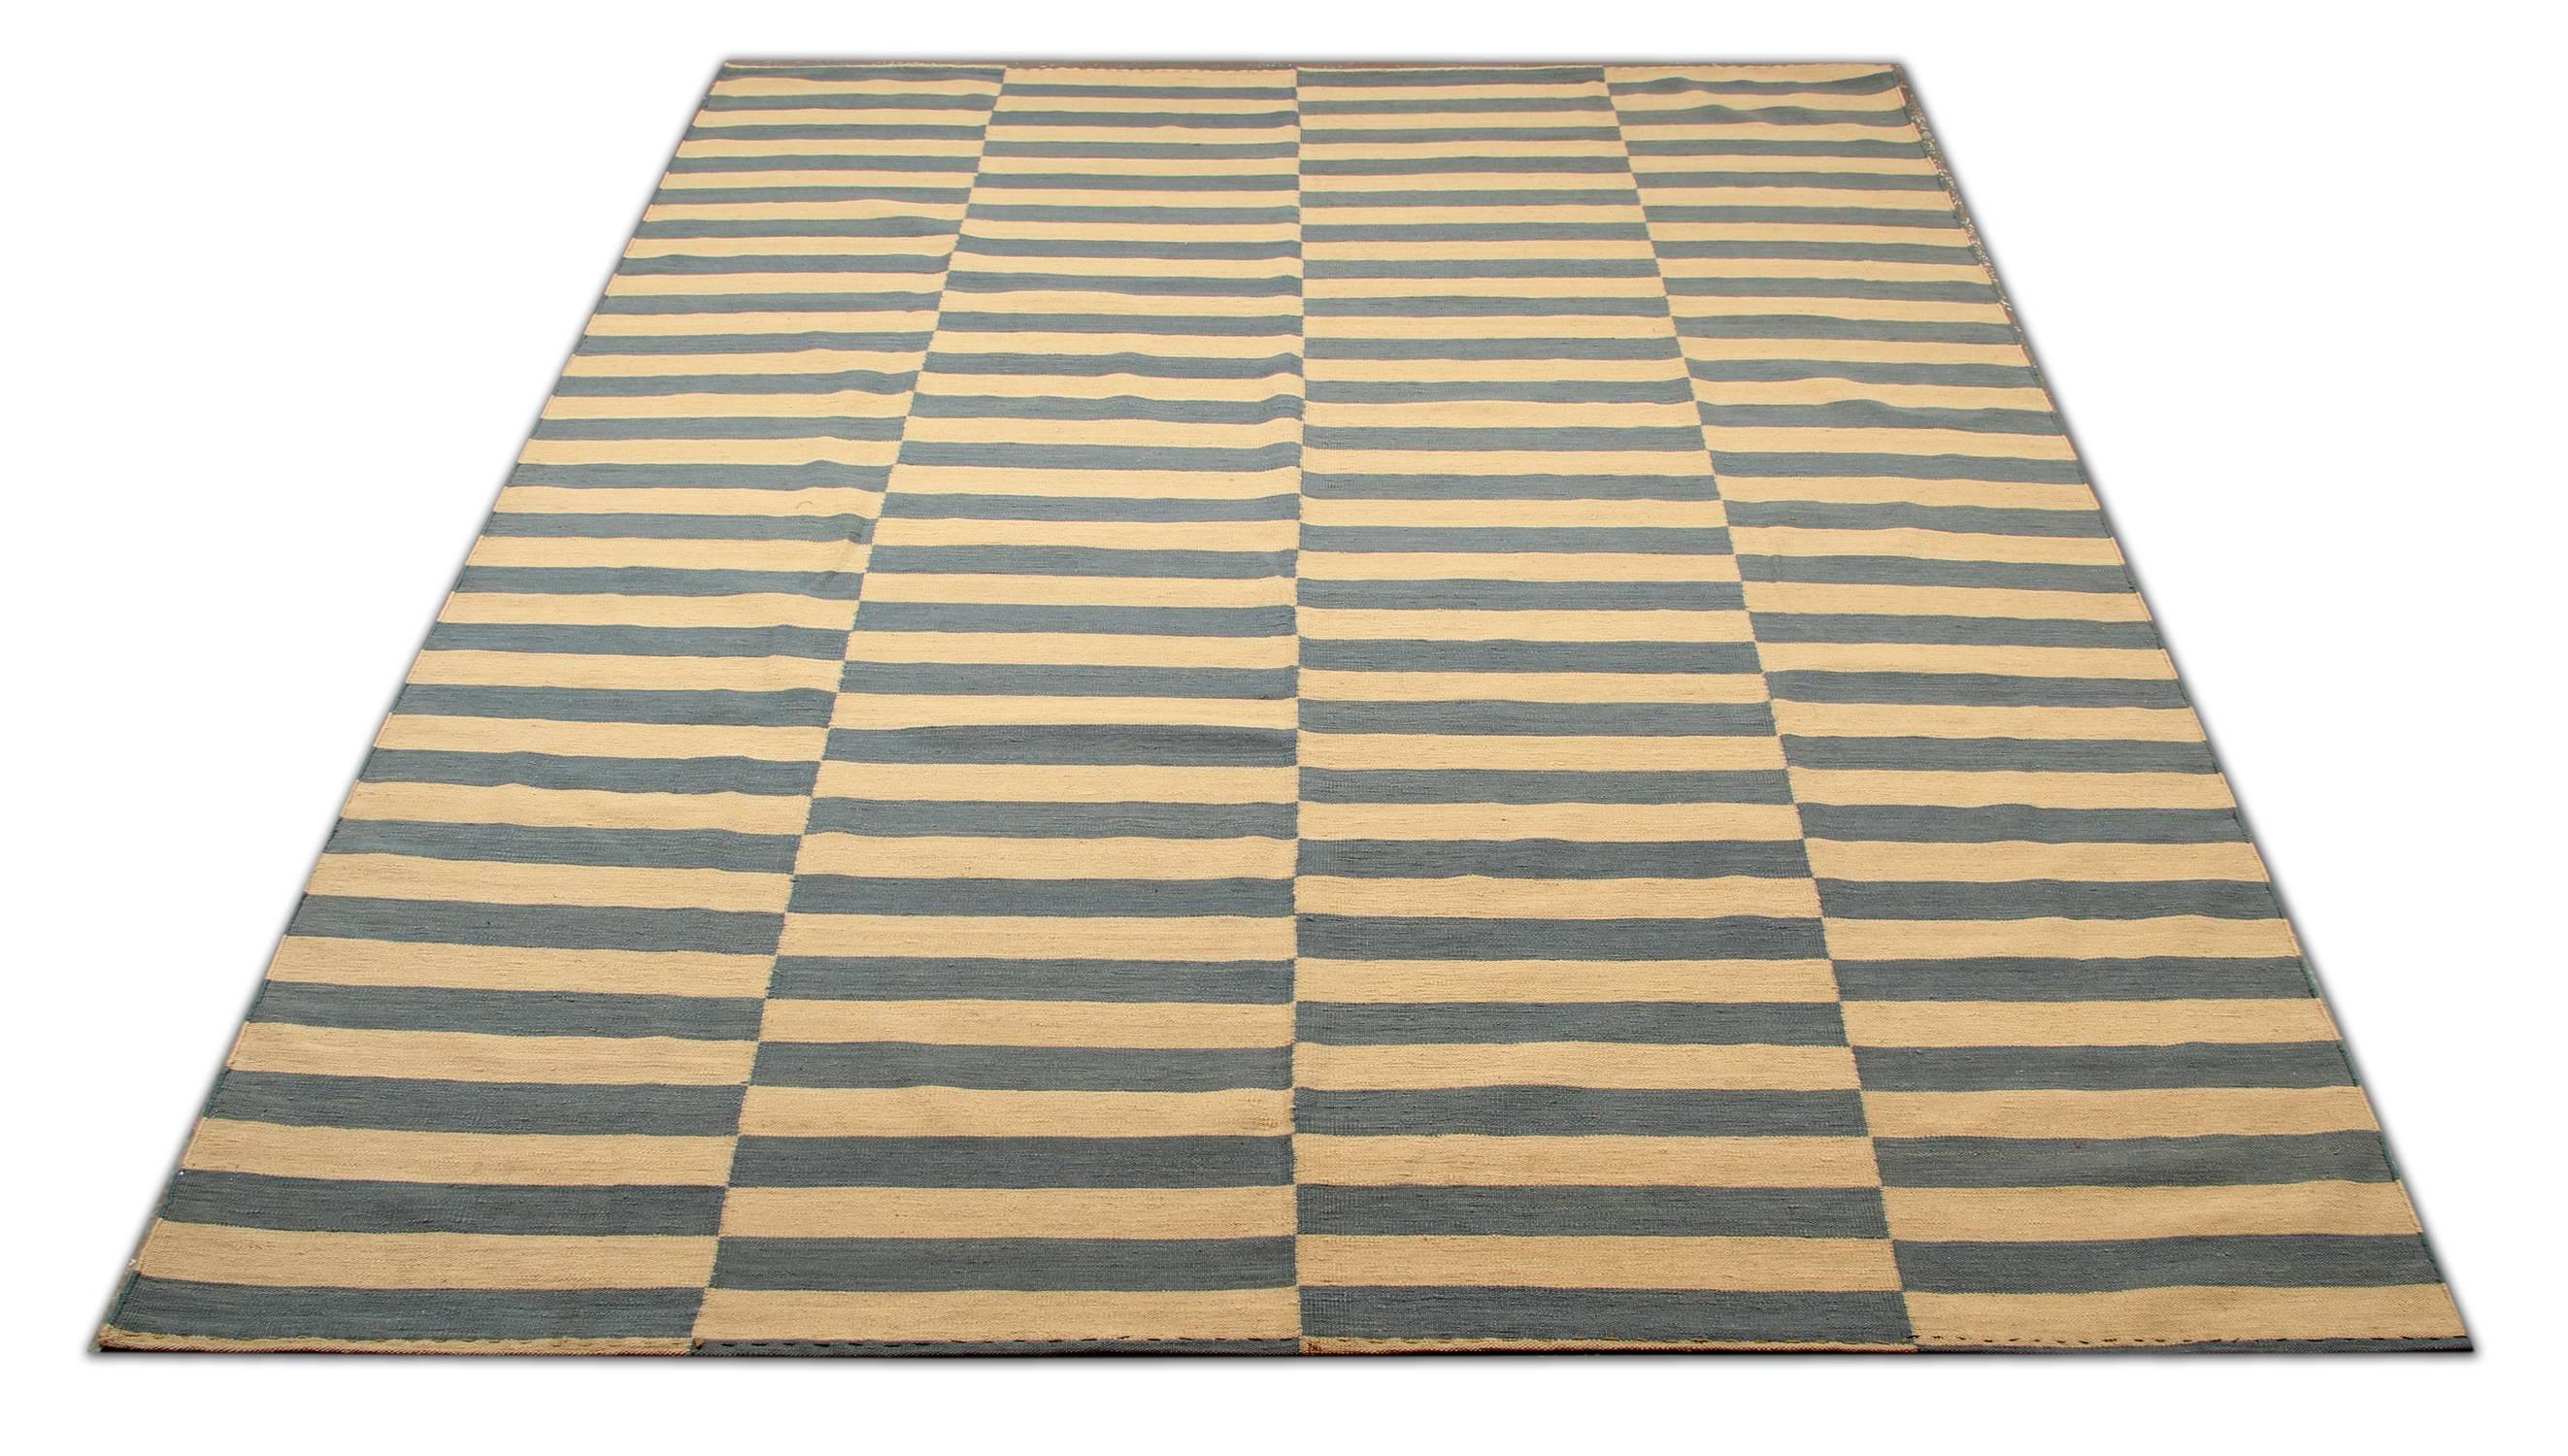 This striped rug is 100% handmade in Afghanistan. It is a Kilim woven rug and therefore it is a flat-woven rug. The materials used for this carpet rug are wool and cotton and the dyes are only organic. This blue, yellow and grey rug is hard-wearing